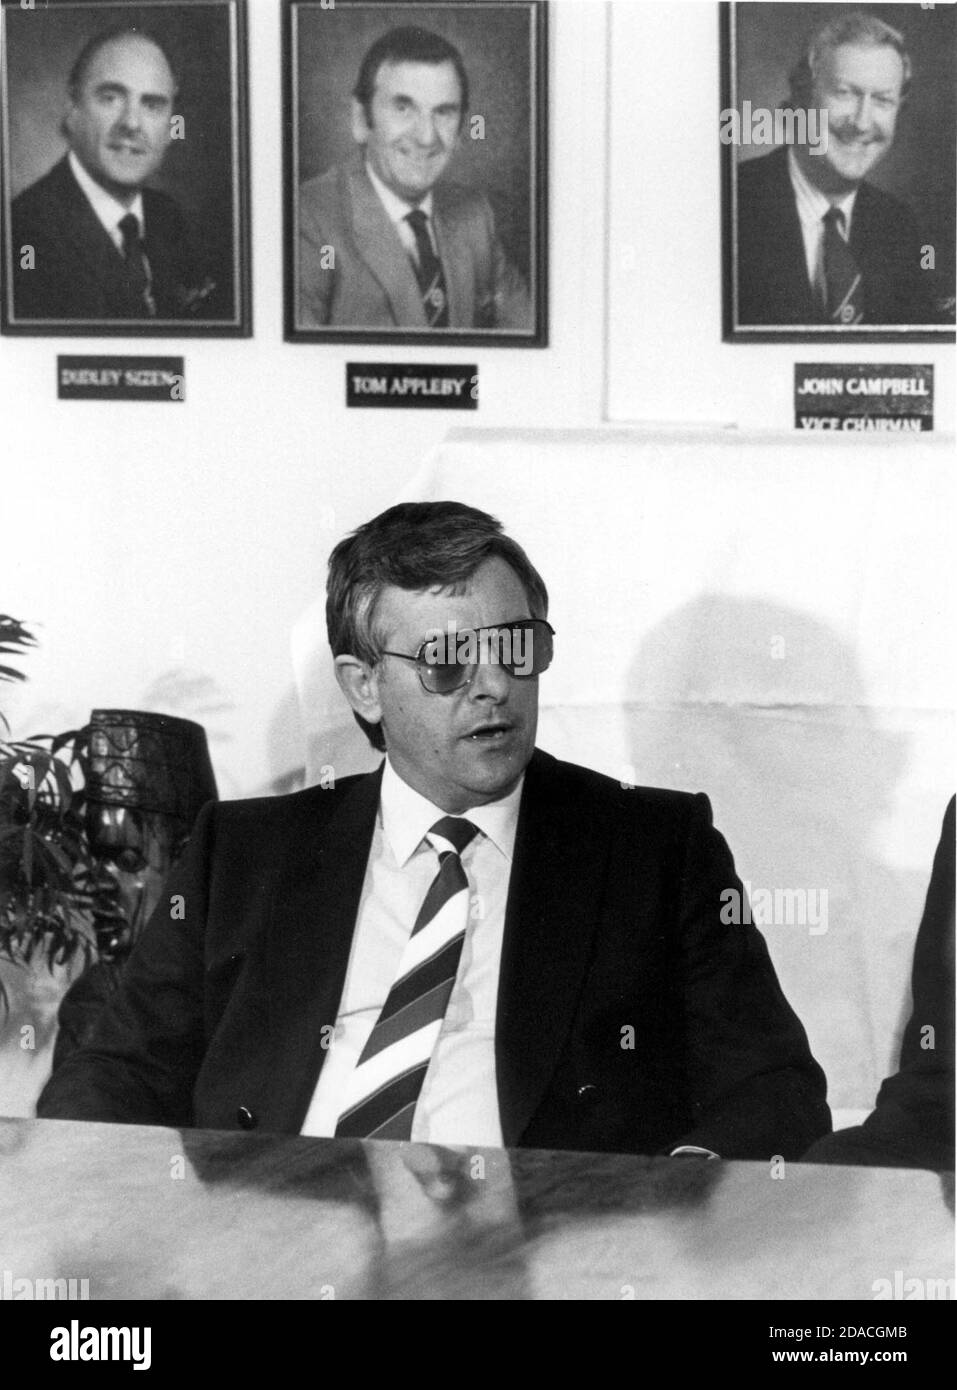 ALAN MULLERY BACK IN THE HOT SEAT AT BRIGHTON'S GOLDSTONE GROUND AFTER BEING APPOINTED MANAGER. 1985 Stock Photo